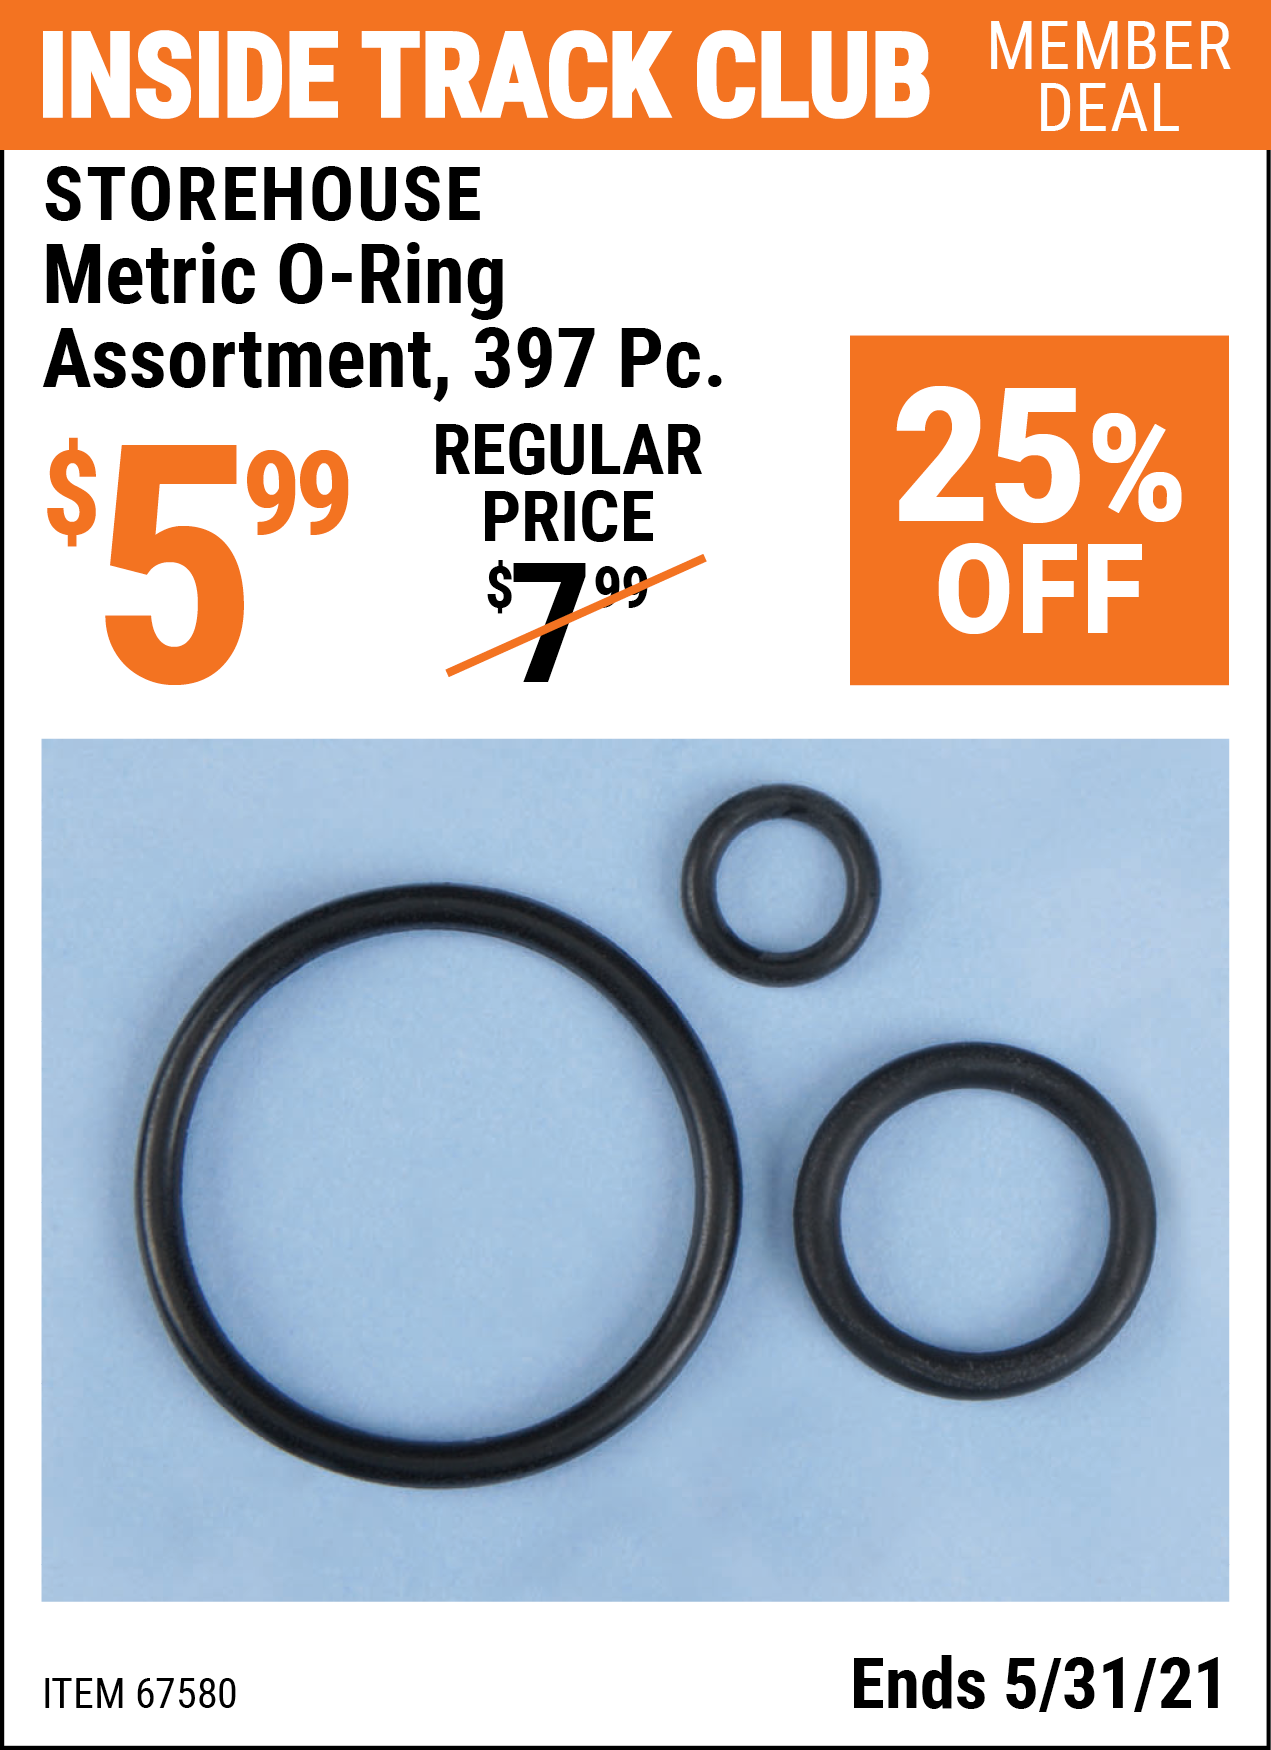 Inside Track Club members can buy the STOREHOUSE 397 Piece Metric O-Ring Assortment (Item 67580) for $5.99, valid through 5/31/2021.